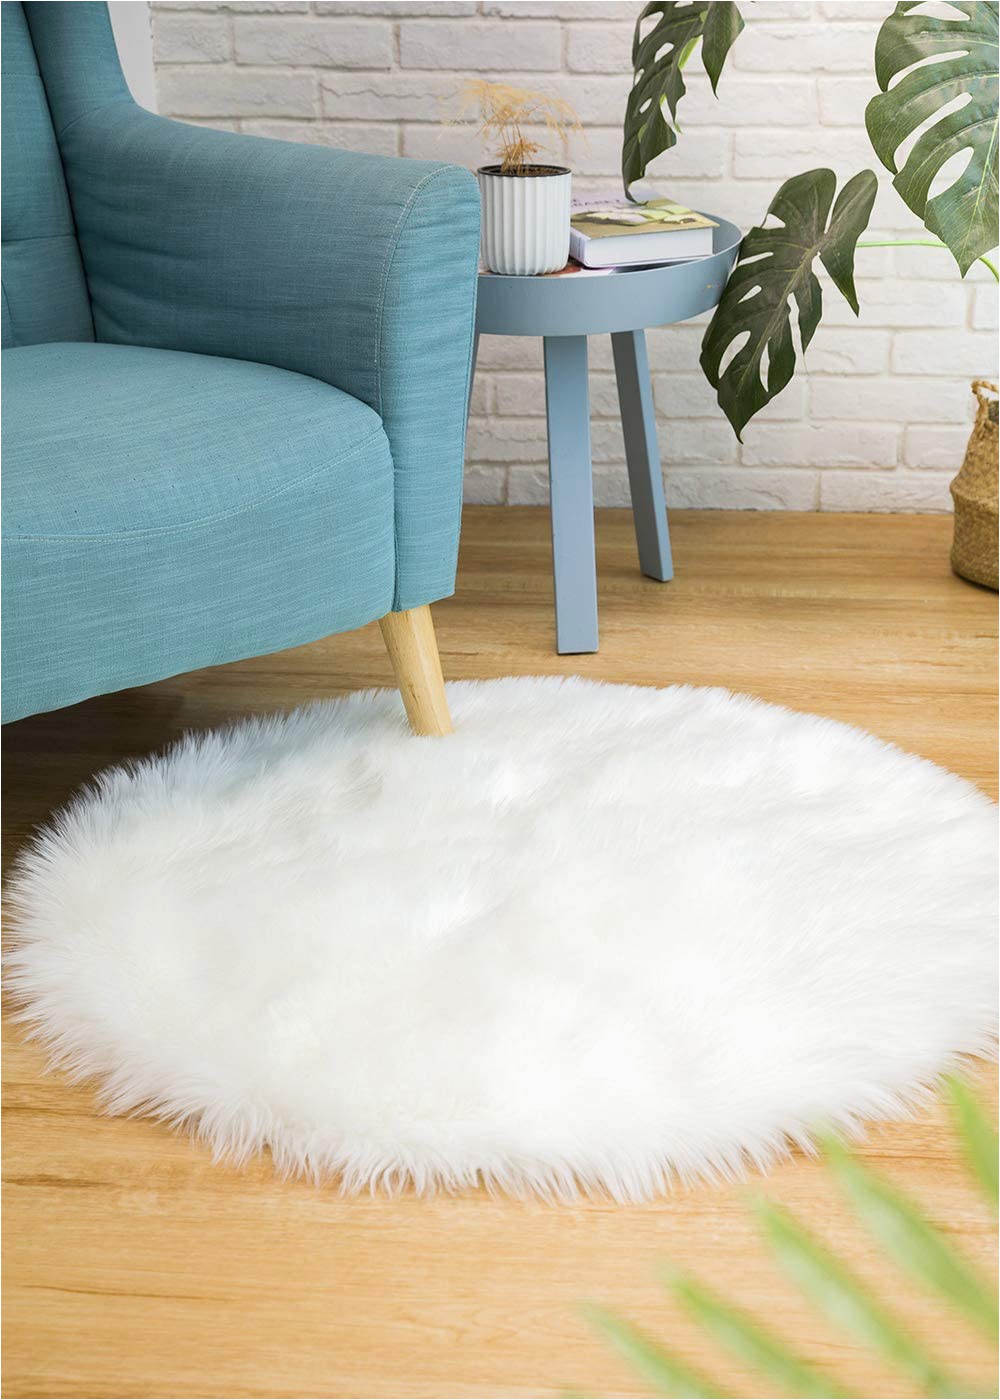 3 Foot Round Bathroom Rug Ciicool soft Faux Sheepskin Fur area Rugs Round Fluffy Rugs for Bedroom Silky Fuzzy Carpet Furry Rug for Living Room Girls Rooms White 3 X 3 Feet